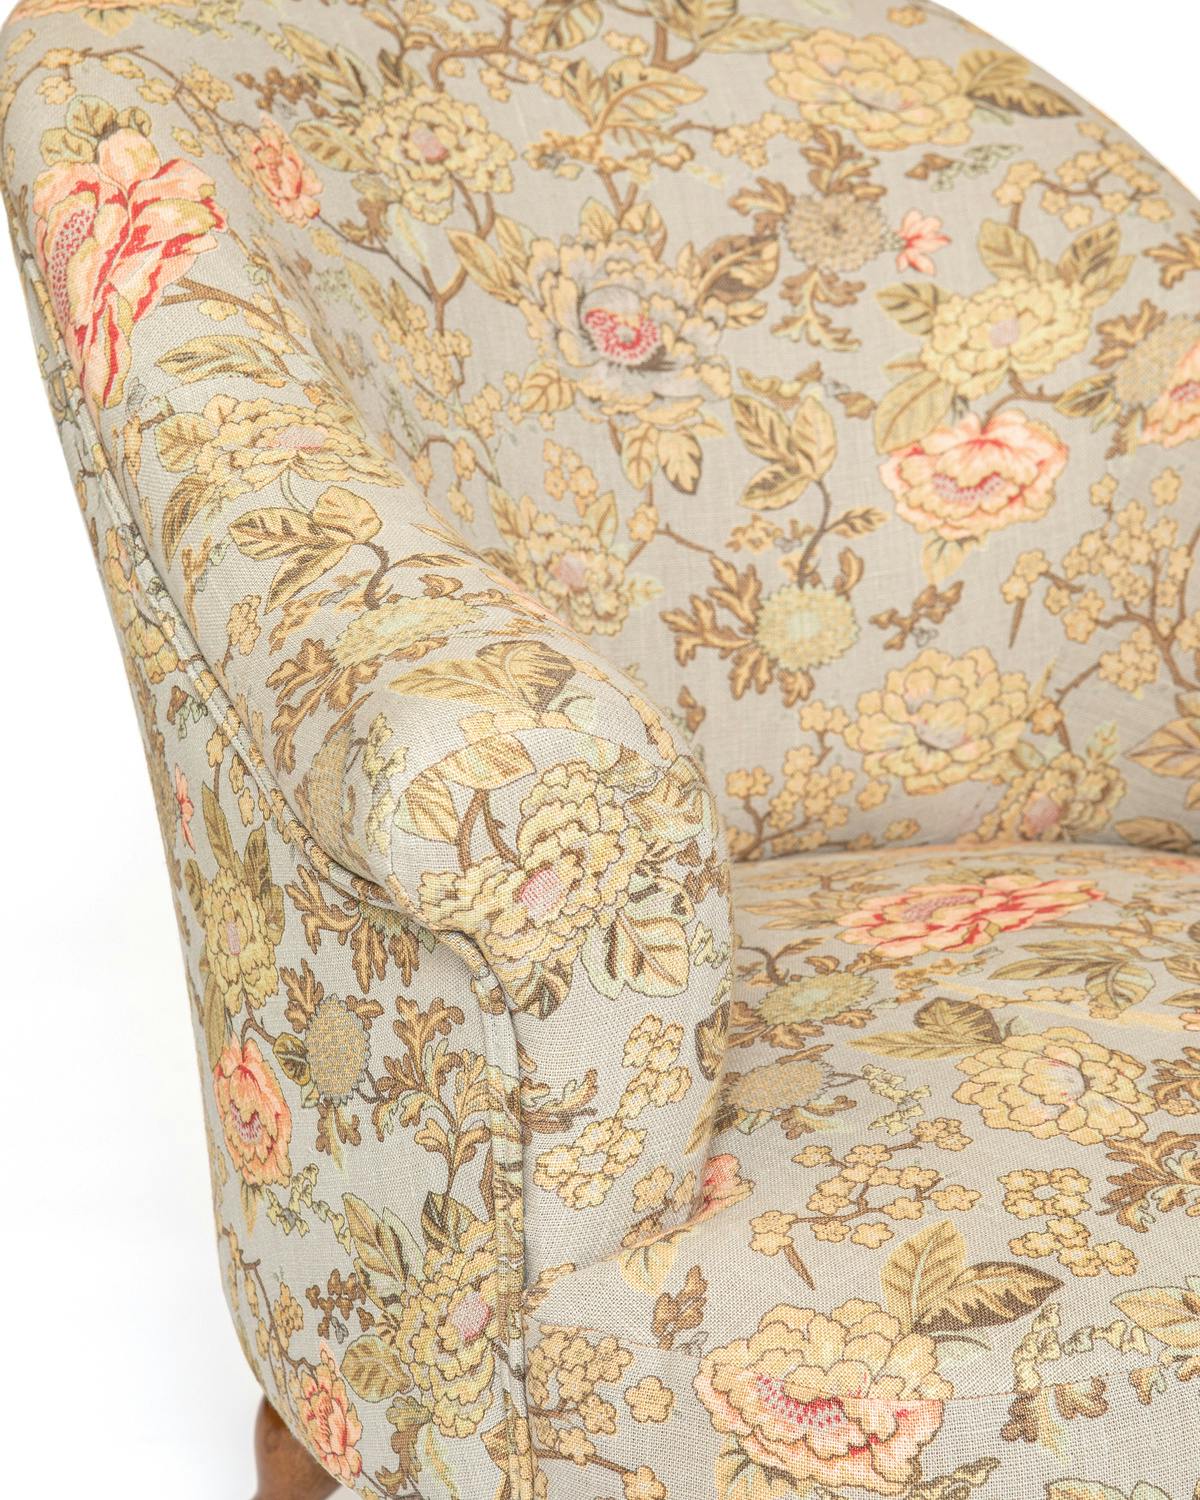 Vintage Chair (In store Exclusive), Dusty Flowers. Image #5